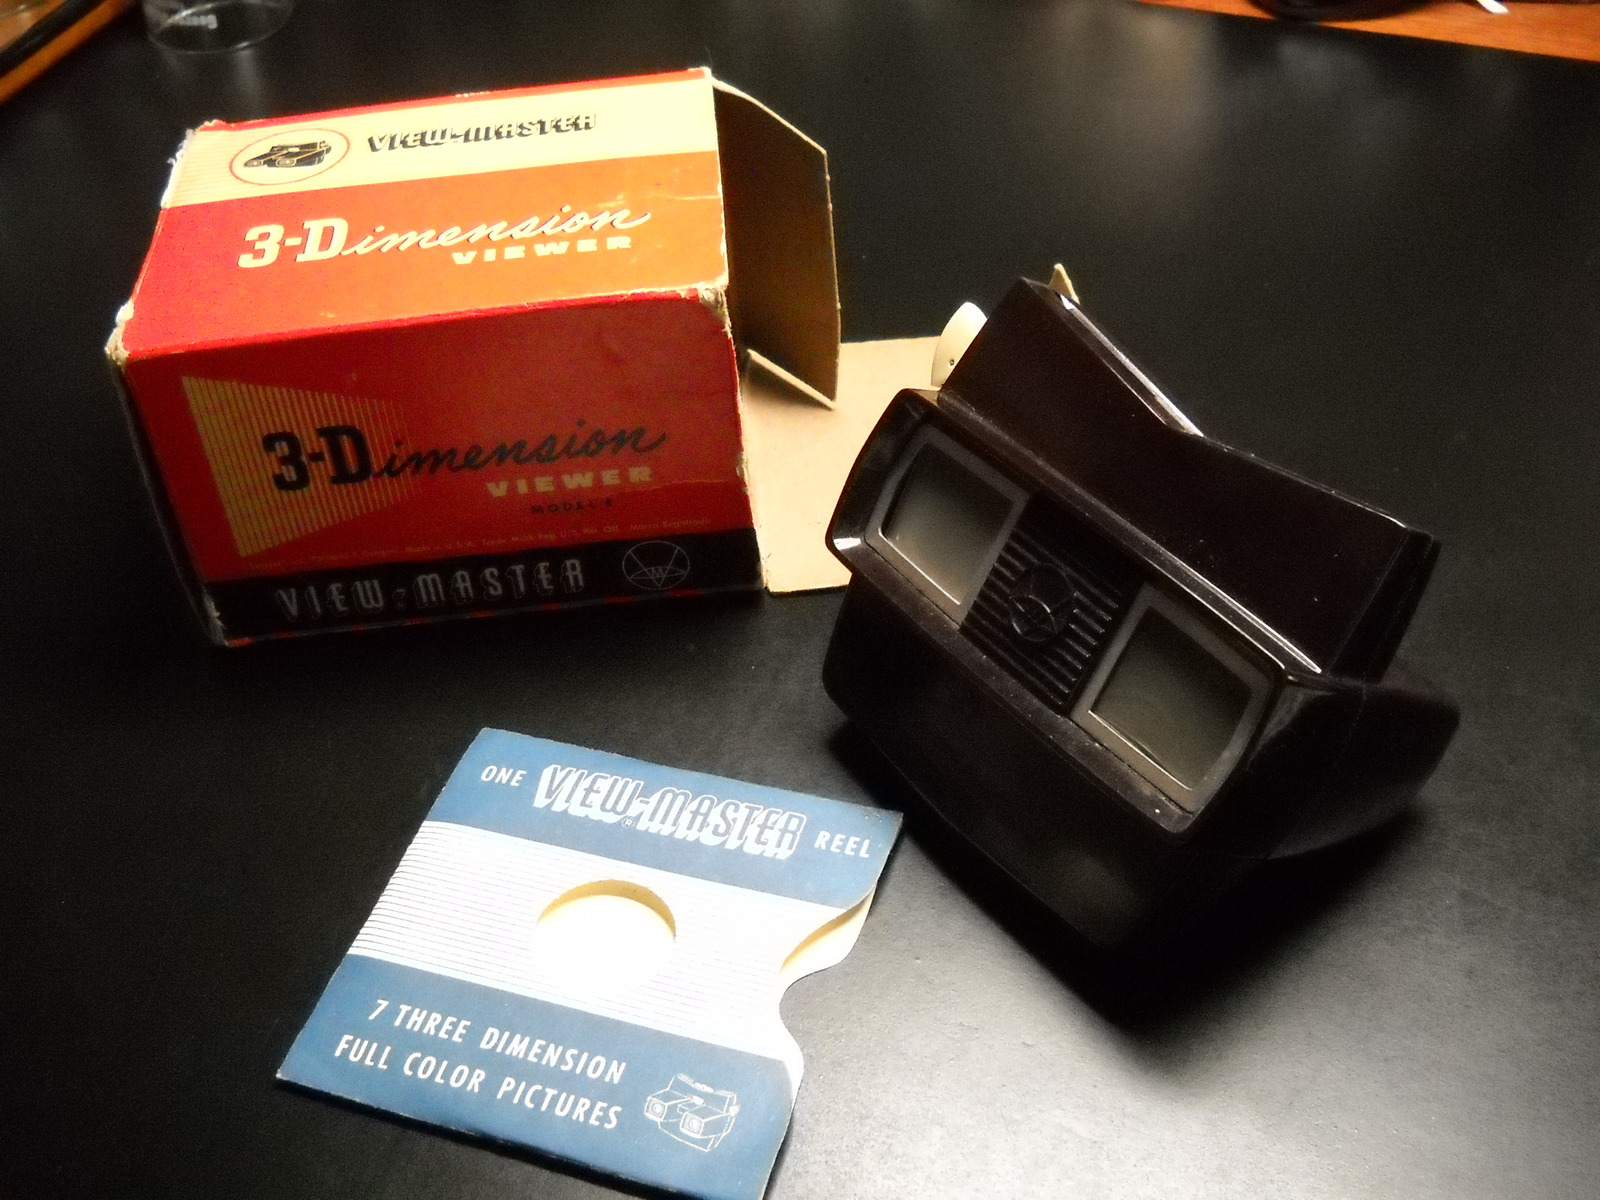 View-Master 3-Dimension Viewer Model E and 50 similar items